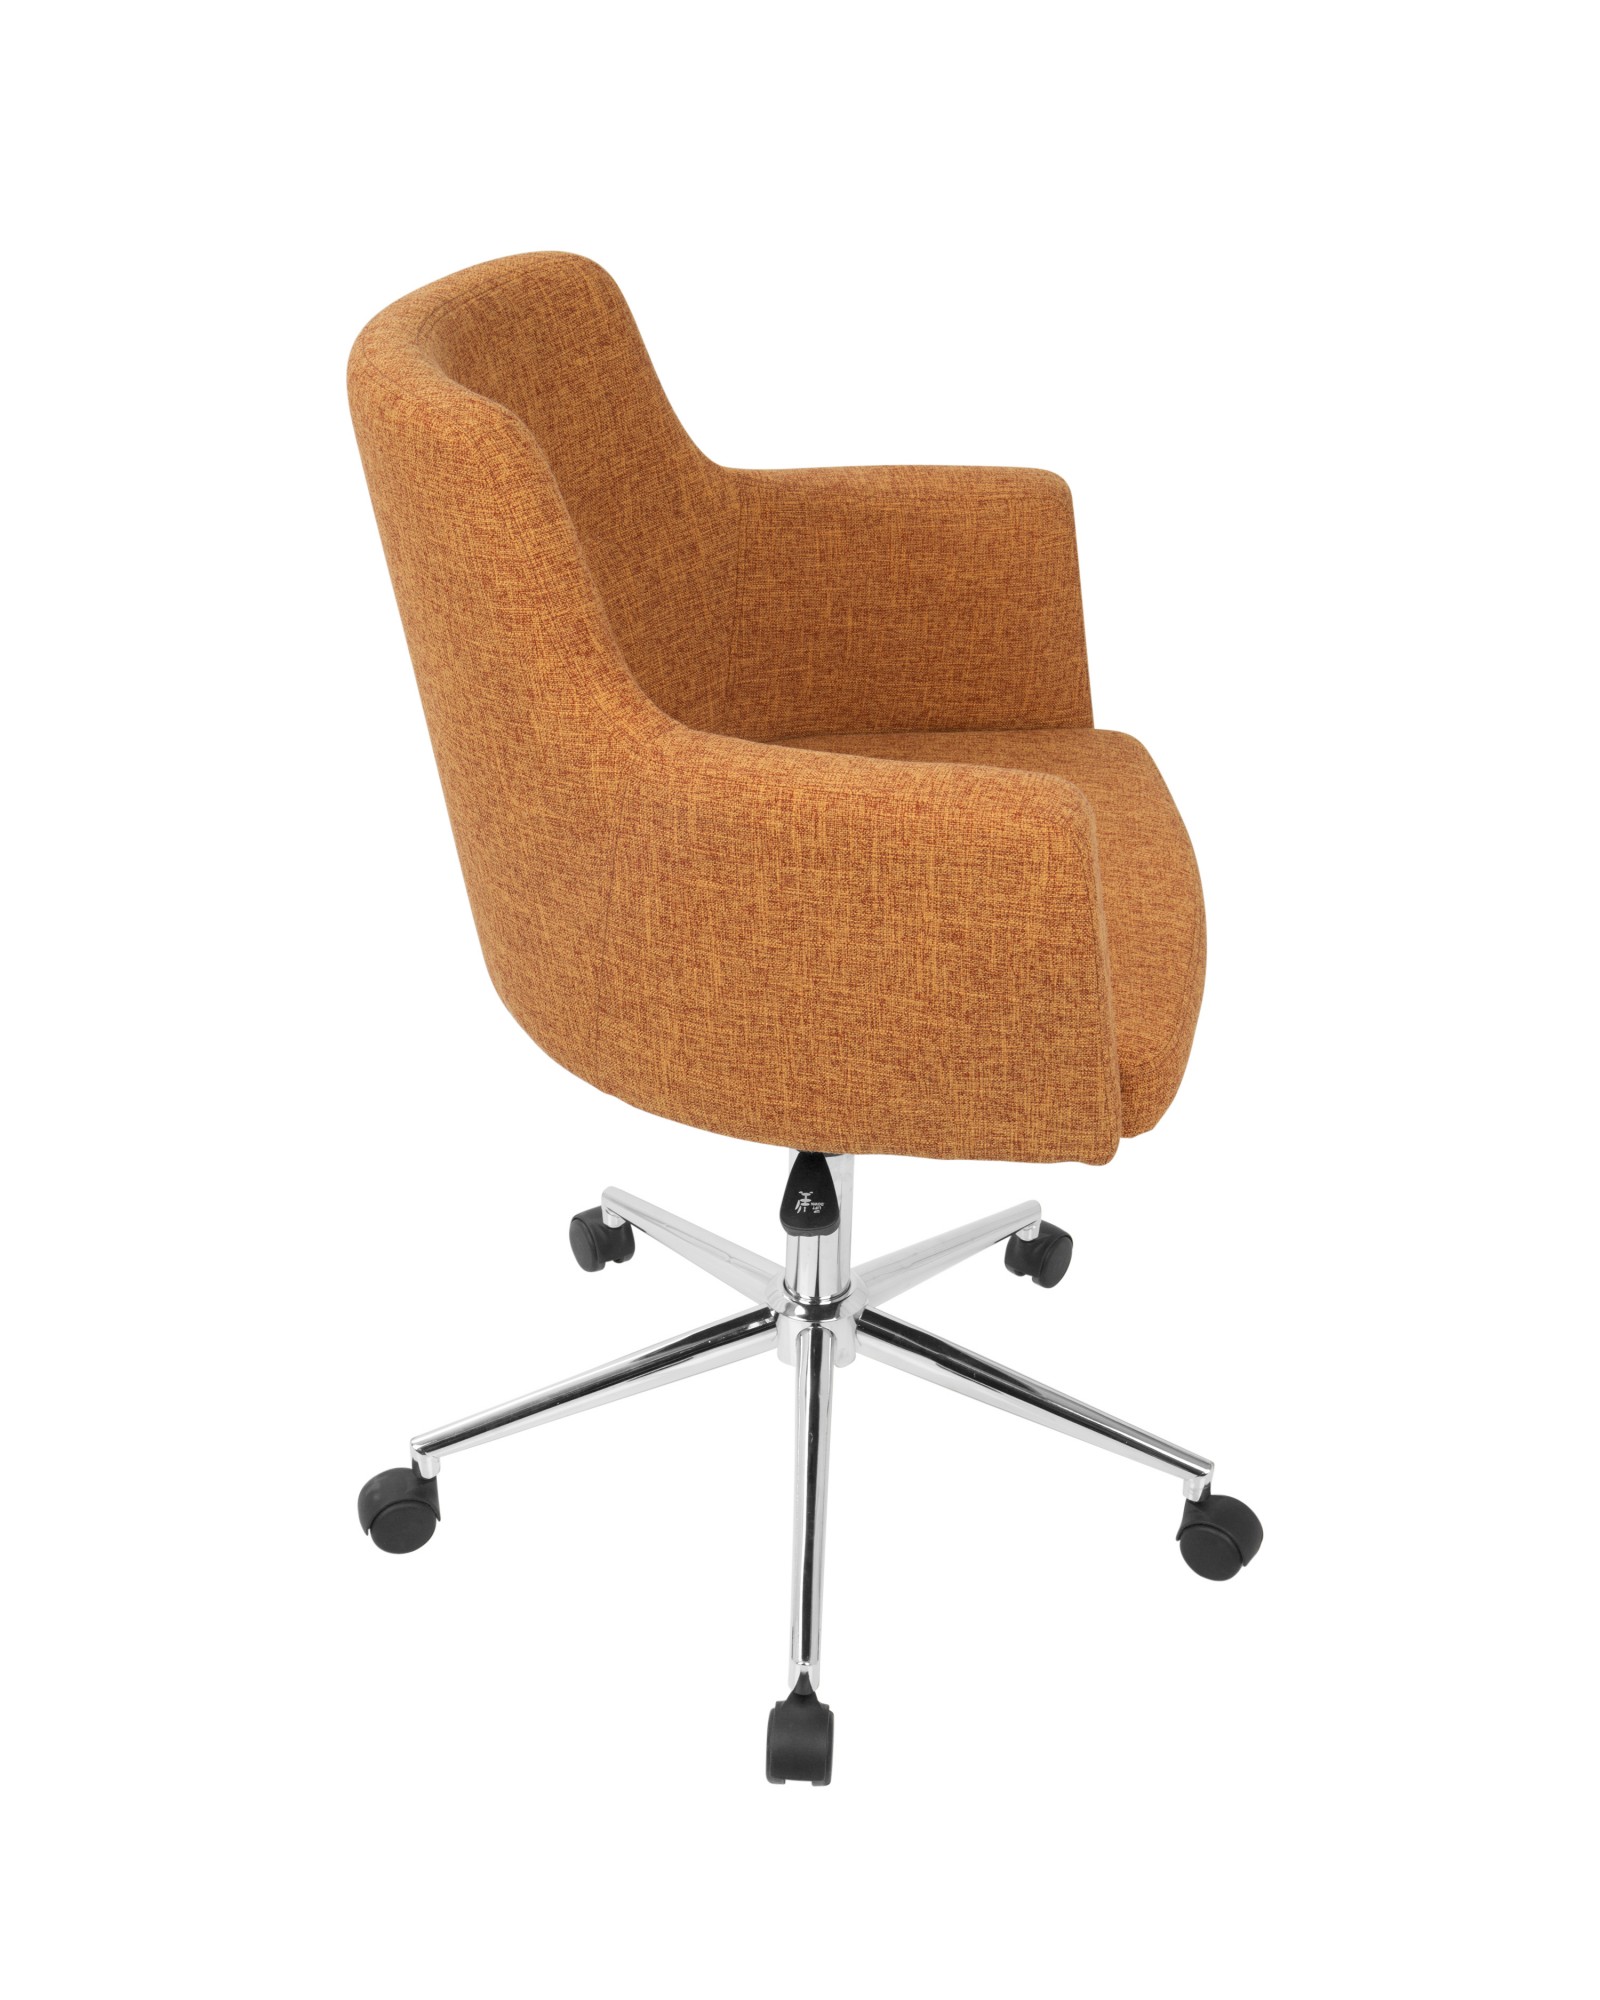 Andrew Contemporary Adjustable Office Chair in Orange